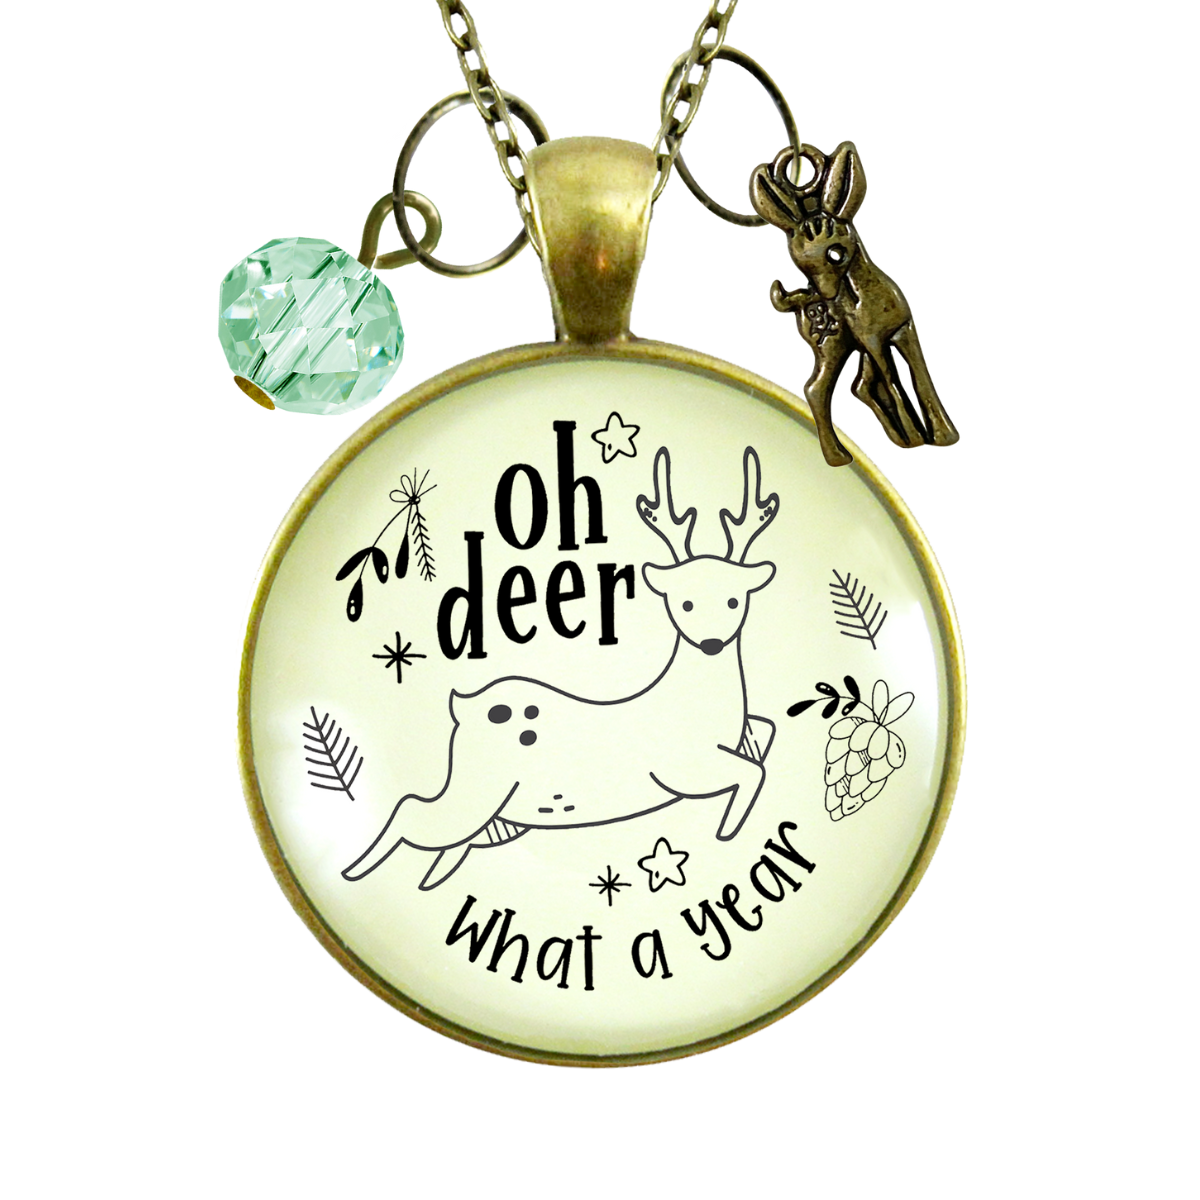 Deer Charm Necklace Oh Deer What a Year Message Jewelry Handmade Glass Pendant Holiday New Year's Gift  Necklace - Gutsy Goodness Handmade Jewelry